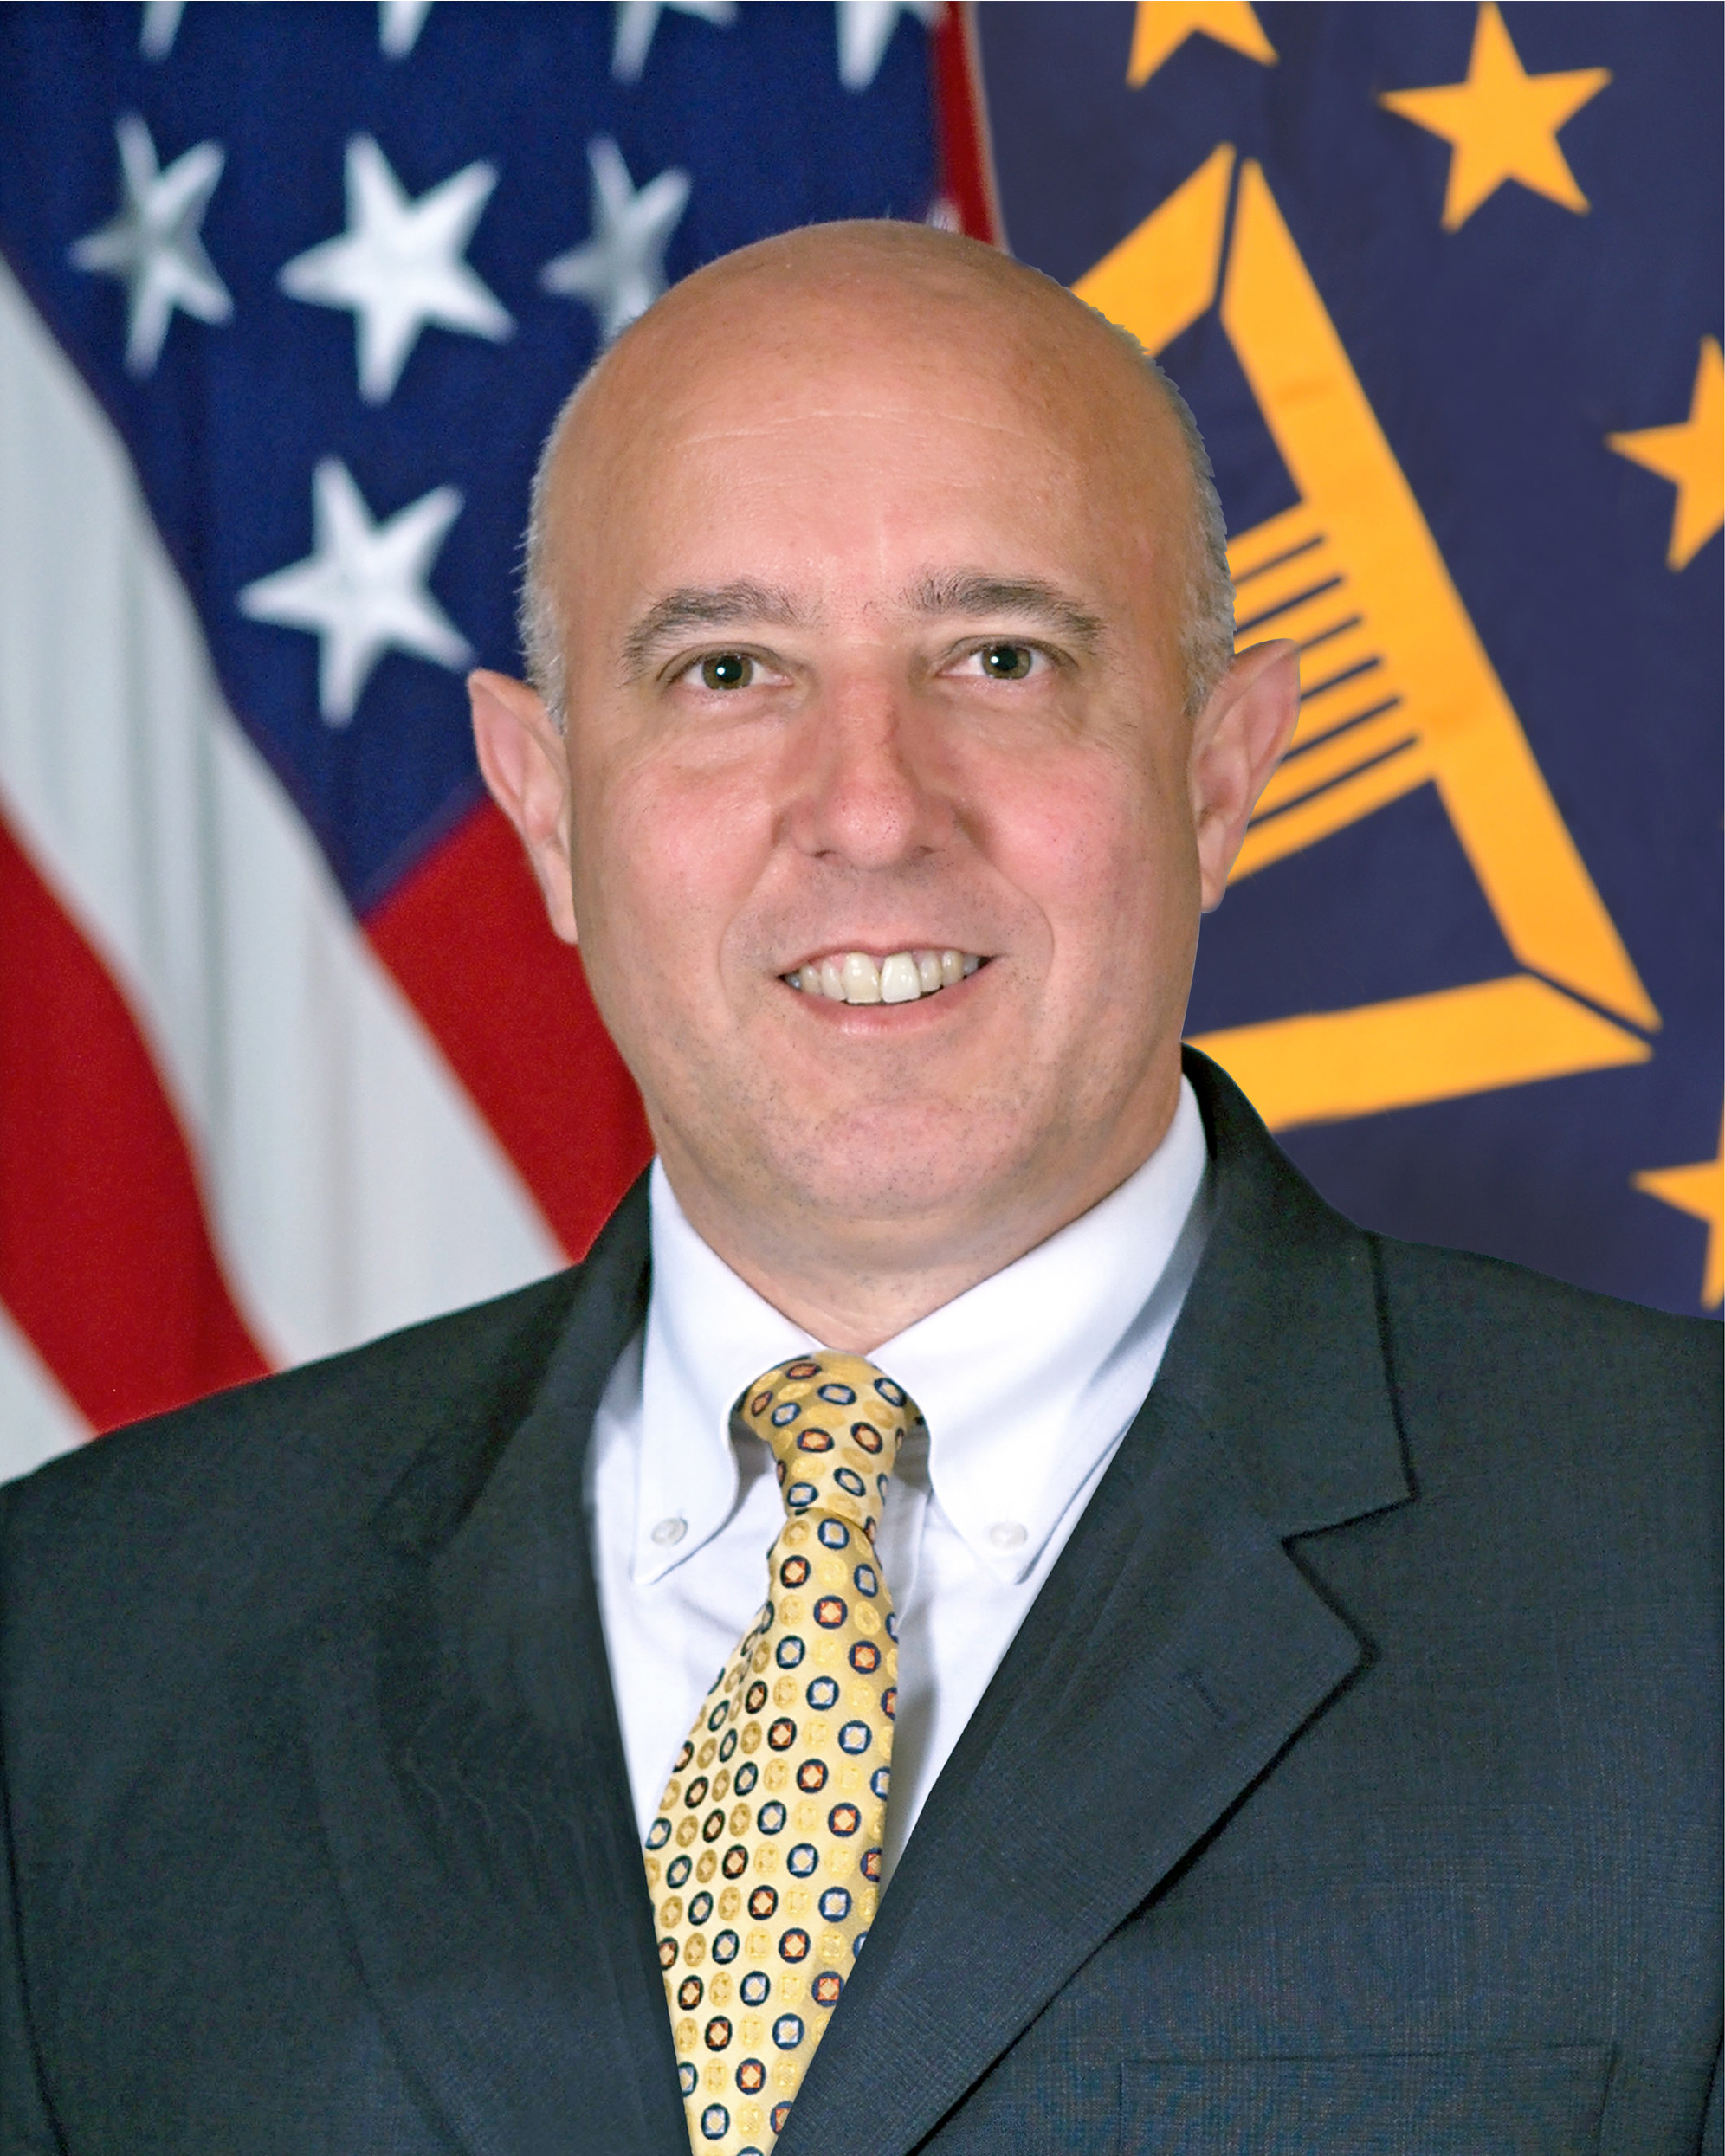 Robert G. Salesses, Deputy Director, Washington Headquarters Services; Acting Director, Facilities Services Directorate